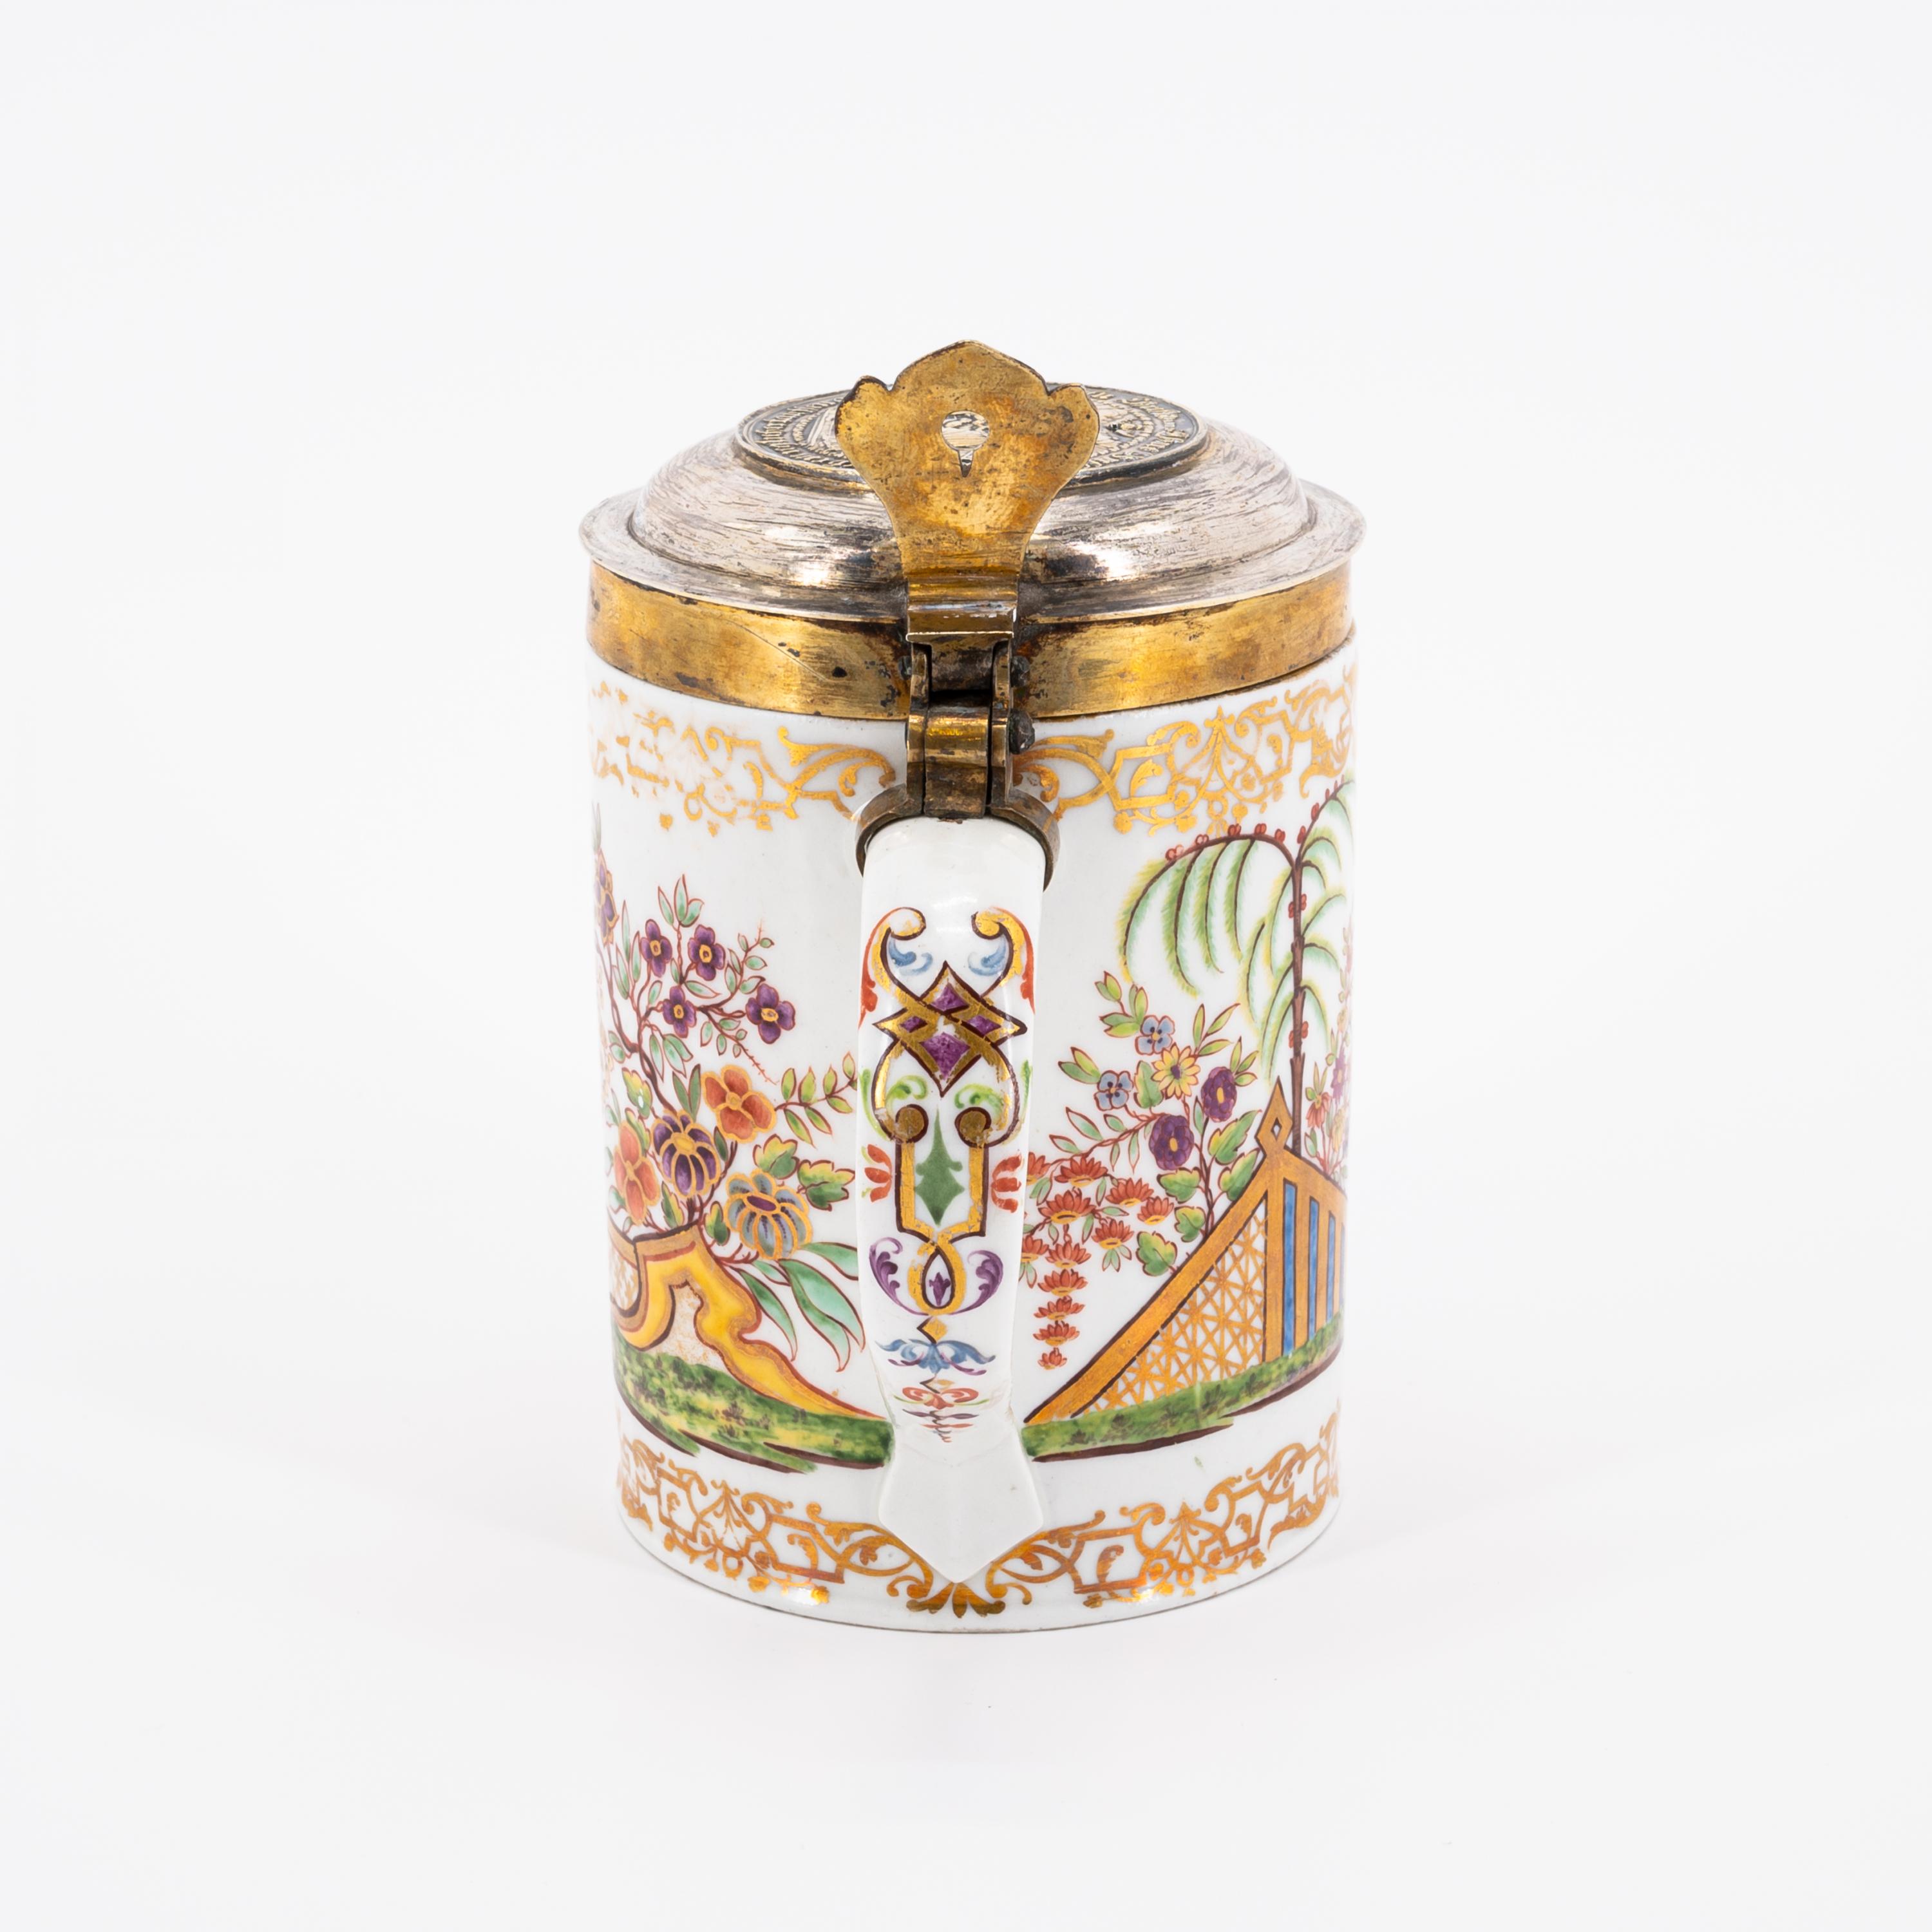 SMALL PORCELAIN 'WALZENKRUG' TANKARD WITH CHINOISERIES - Image 2 of 7